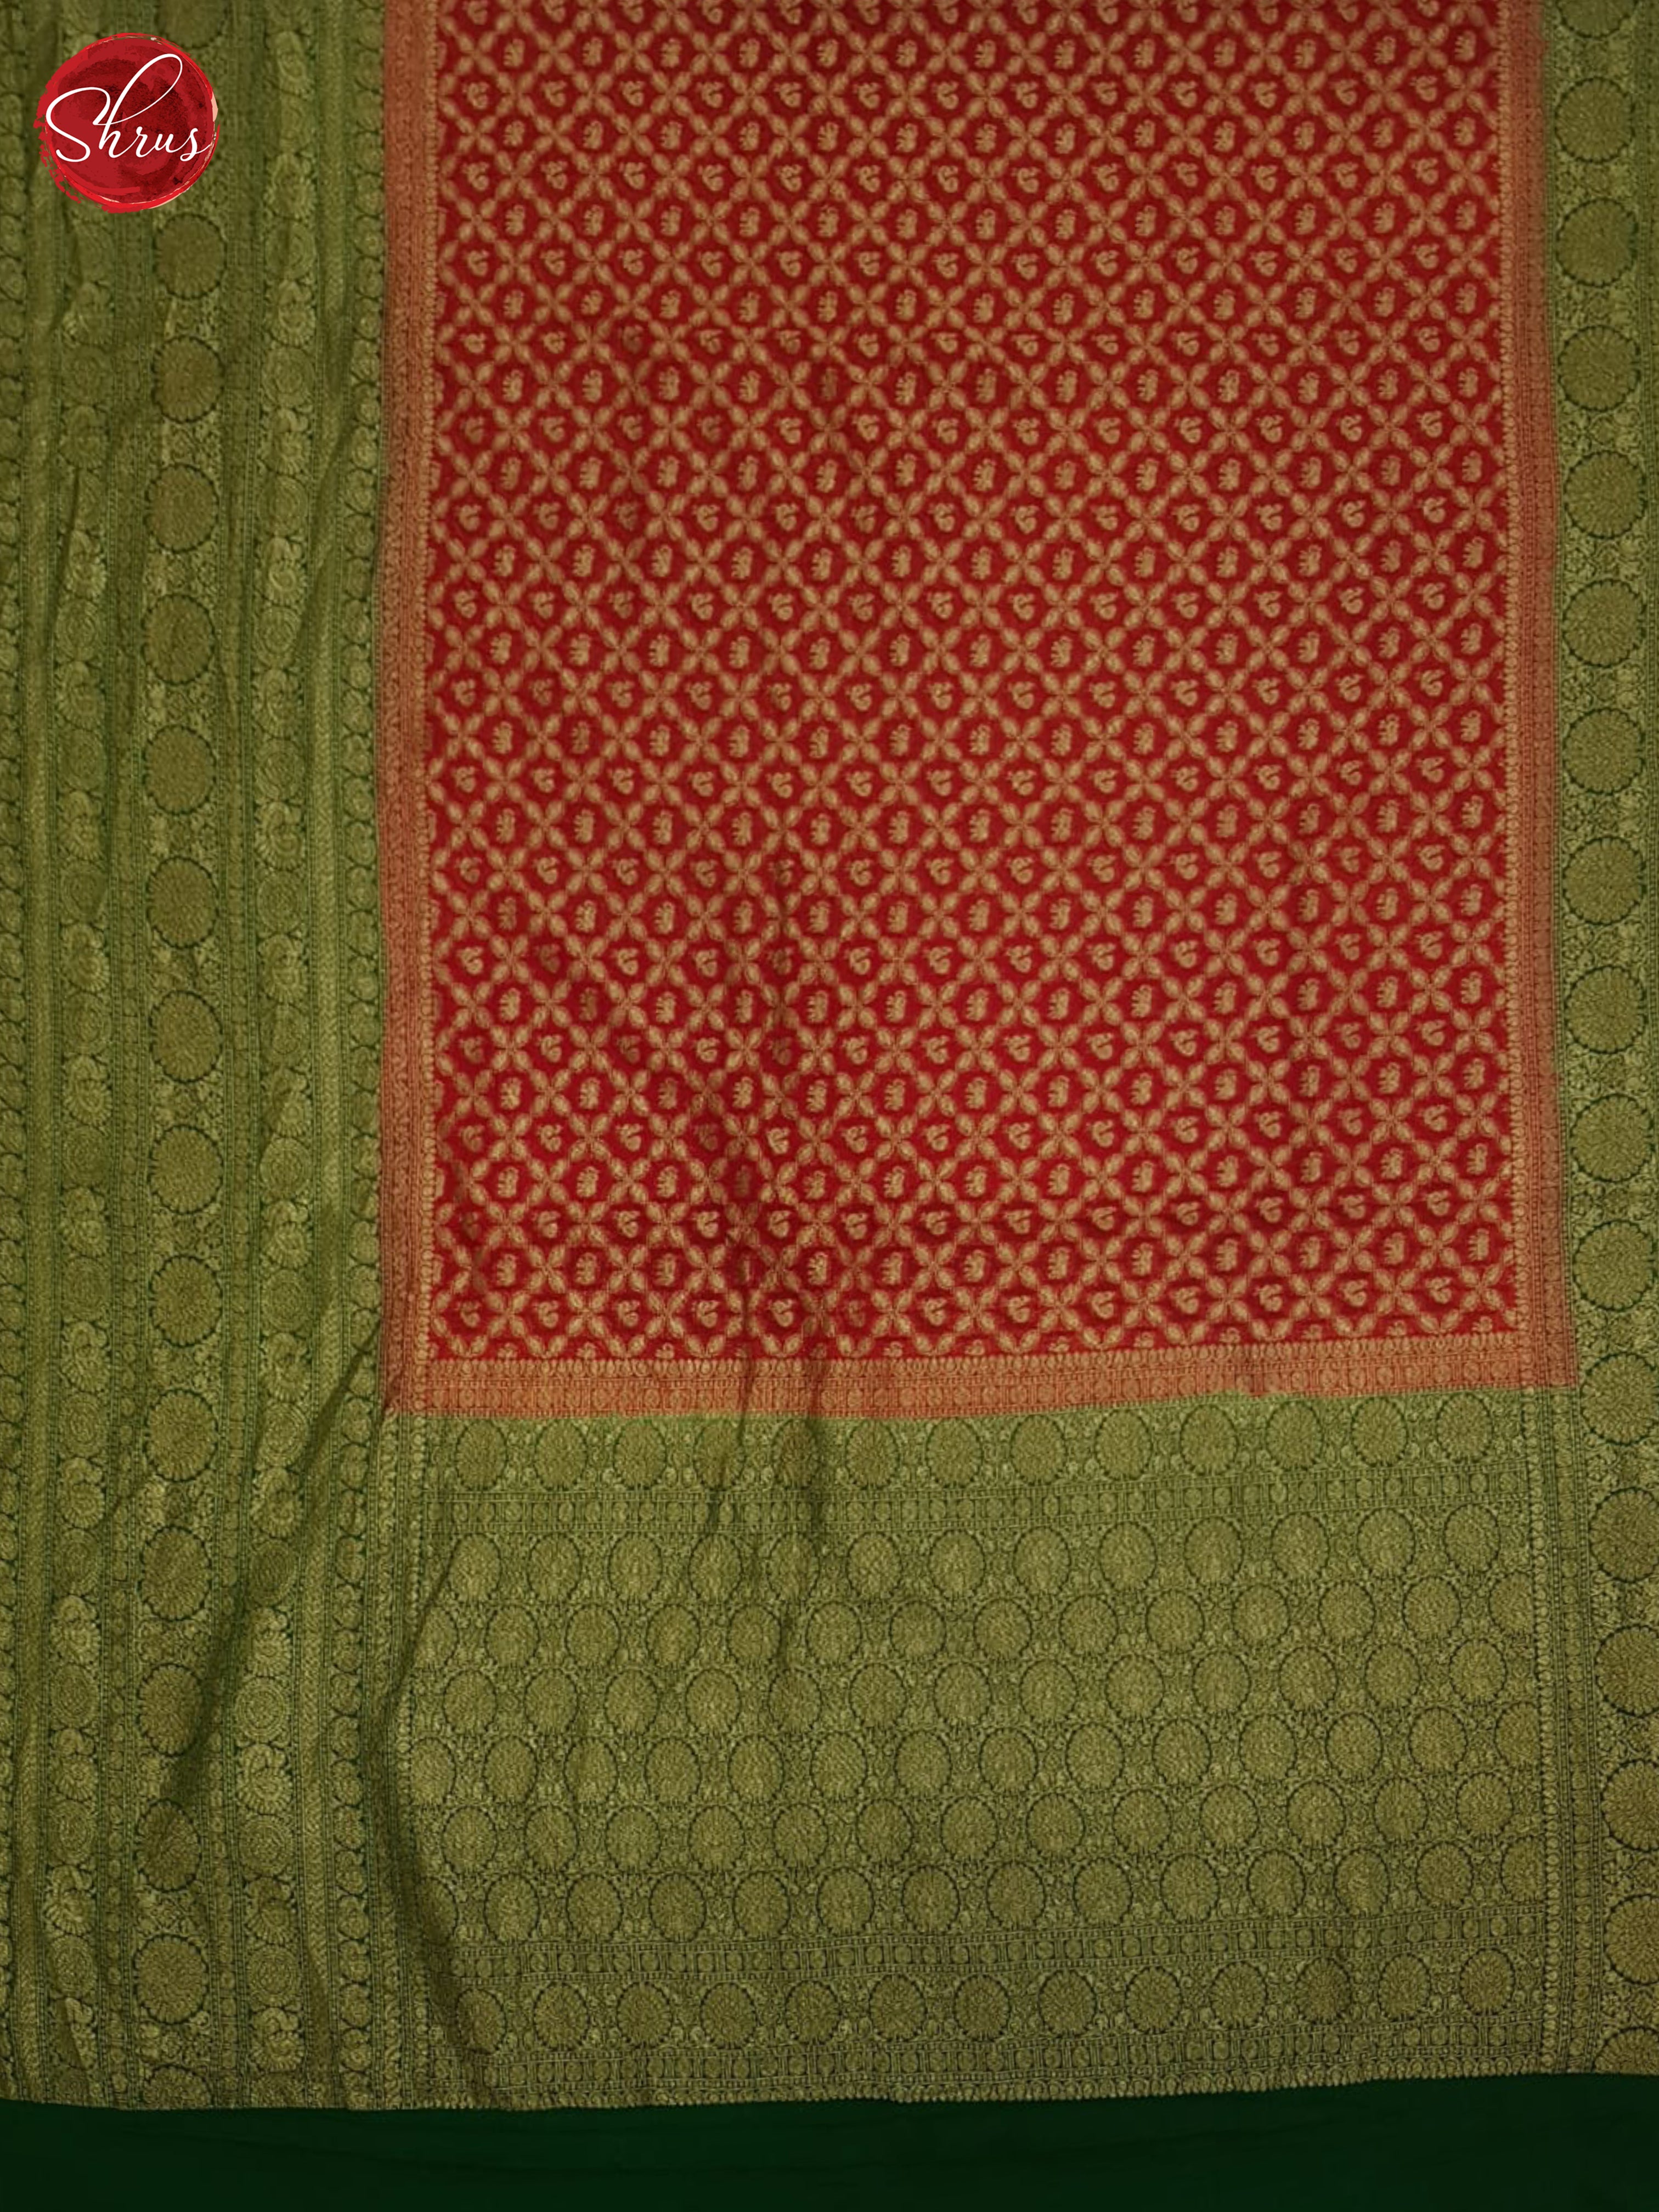 Red And green-Georgette Silk Saree - Shop on ShrusEternity.com